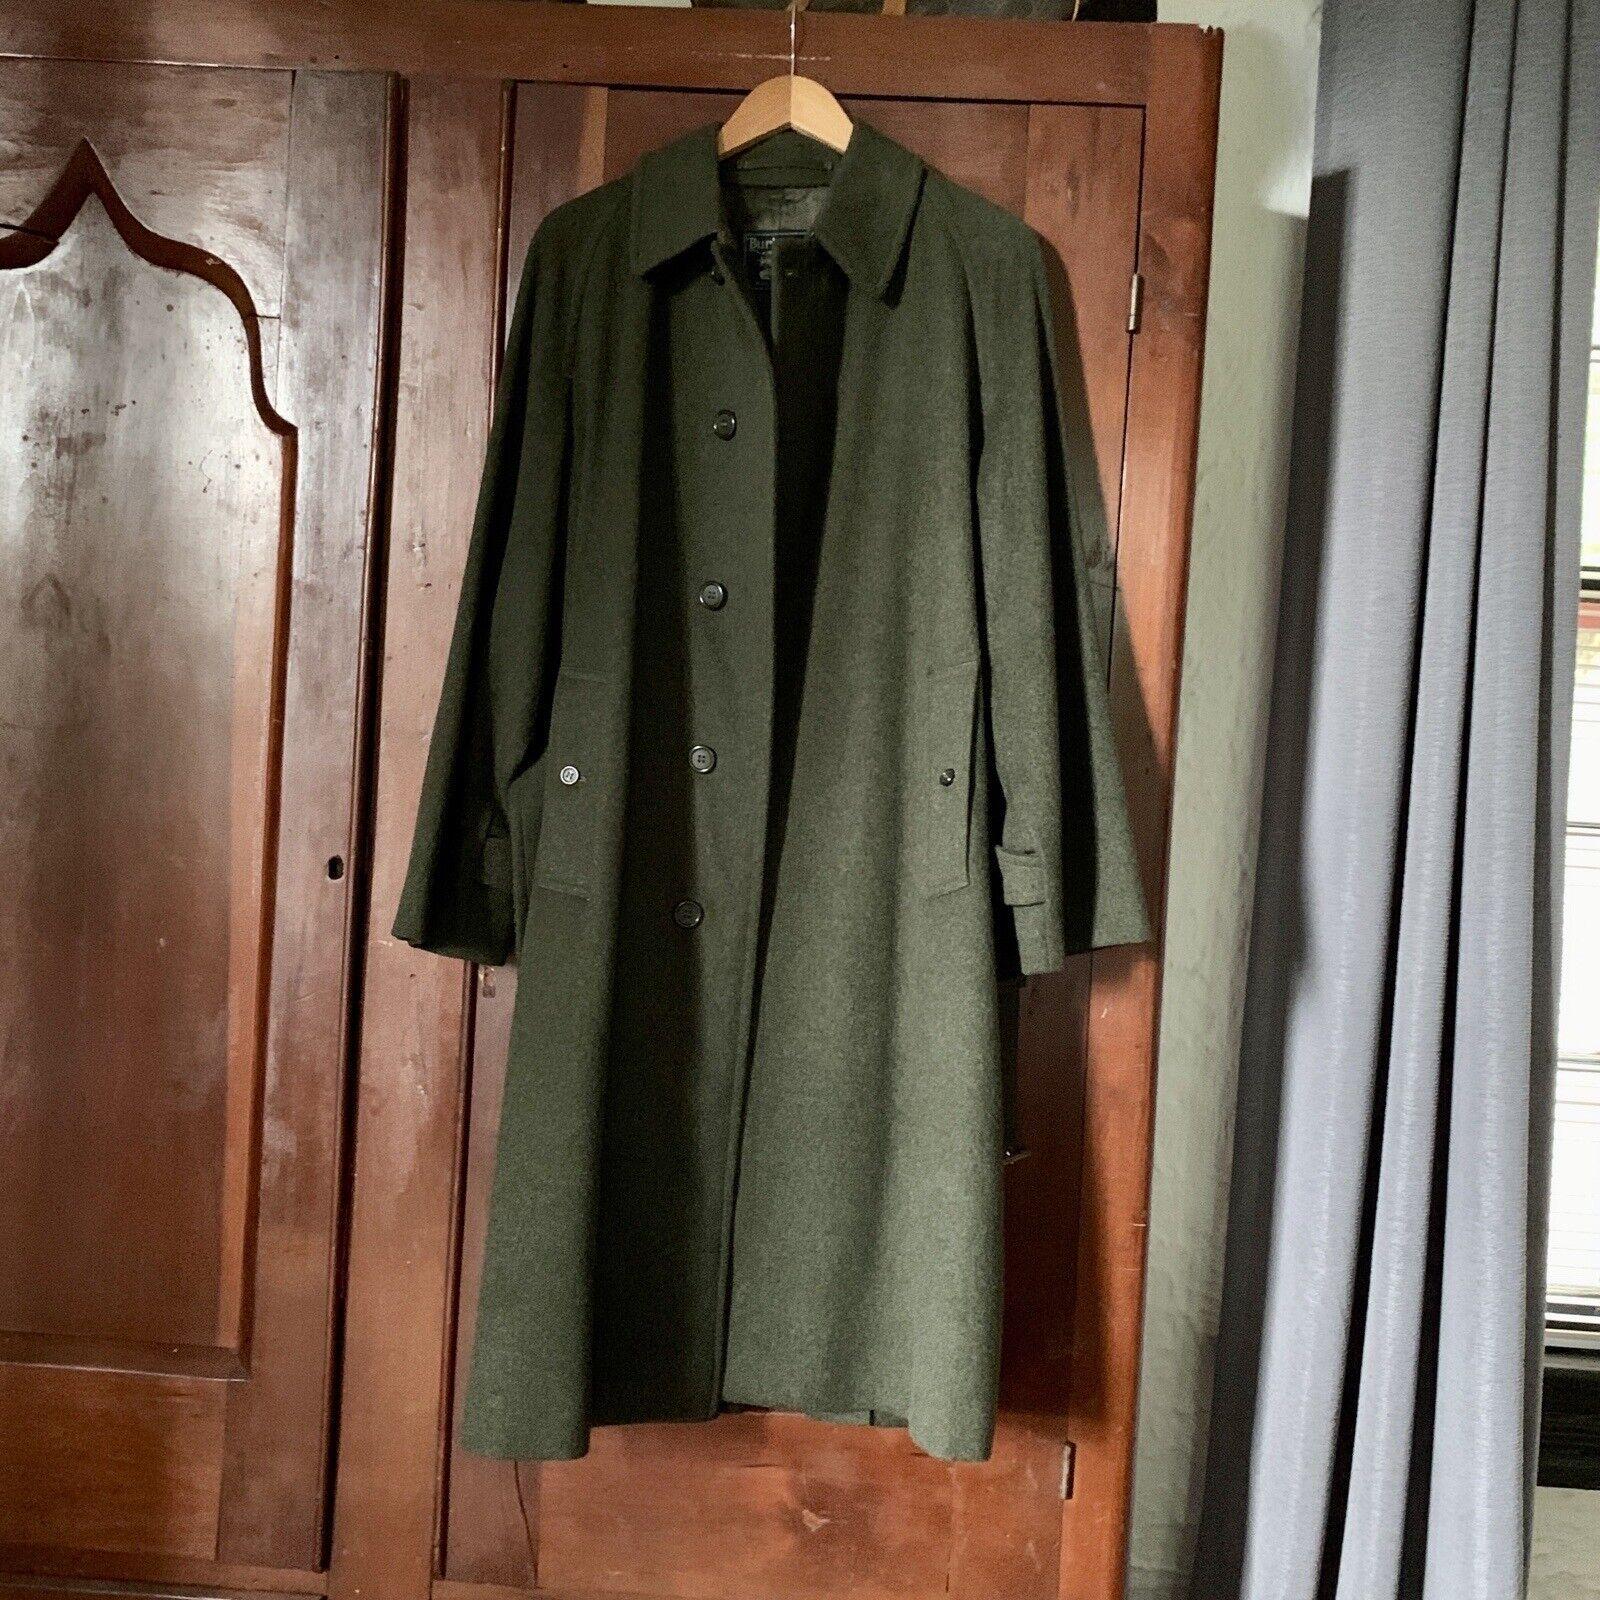 Vintage BURBERRYS Wool Alpaca Long Coat Nova Check Belted Custom Order 38R RARE In Good Condition For Sale In Asheville, NC